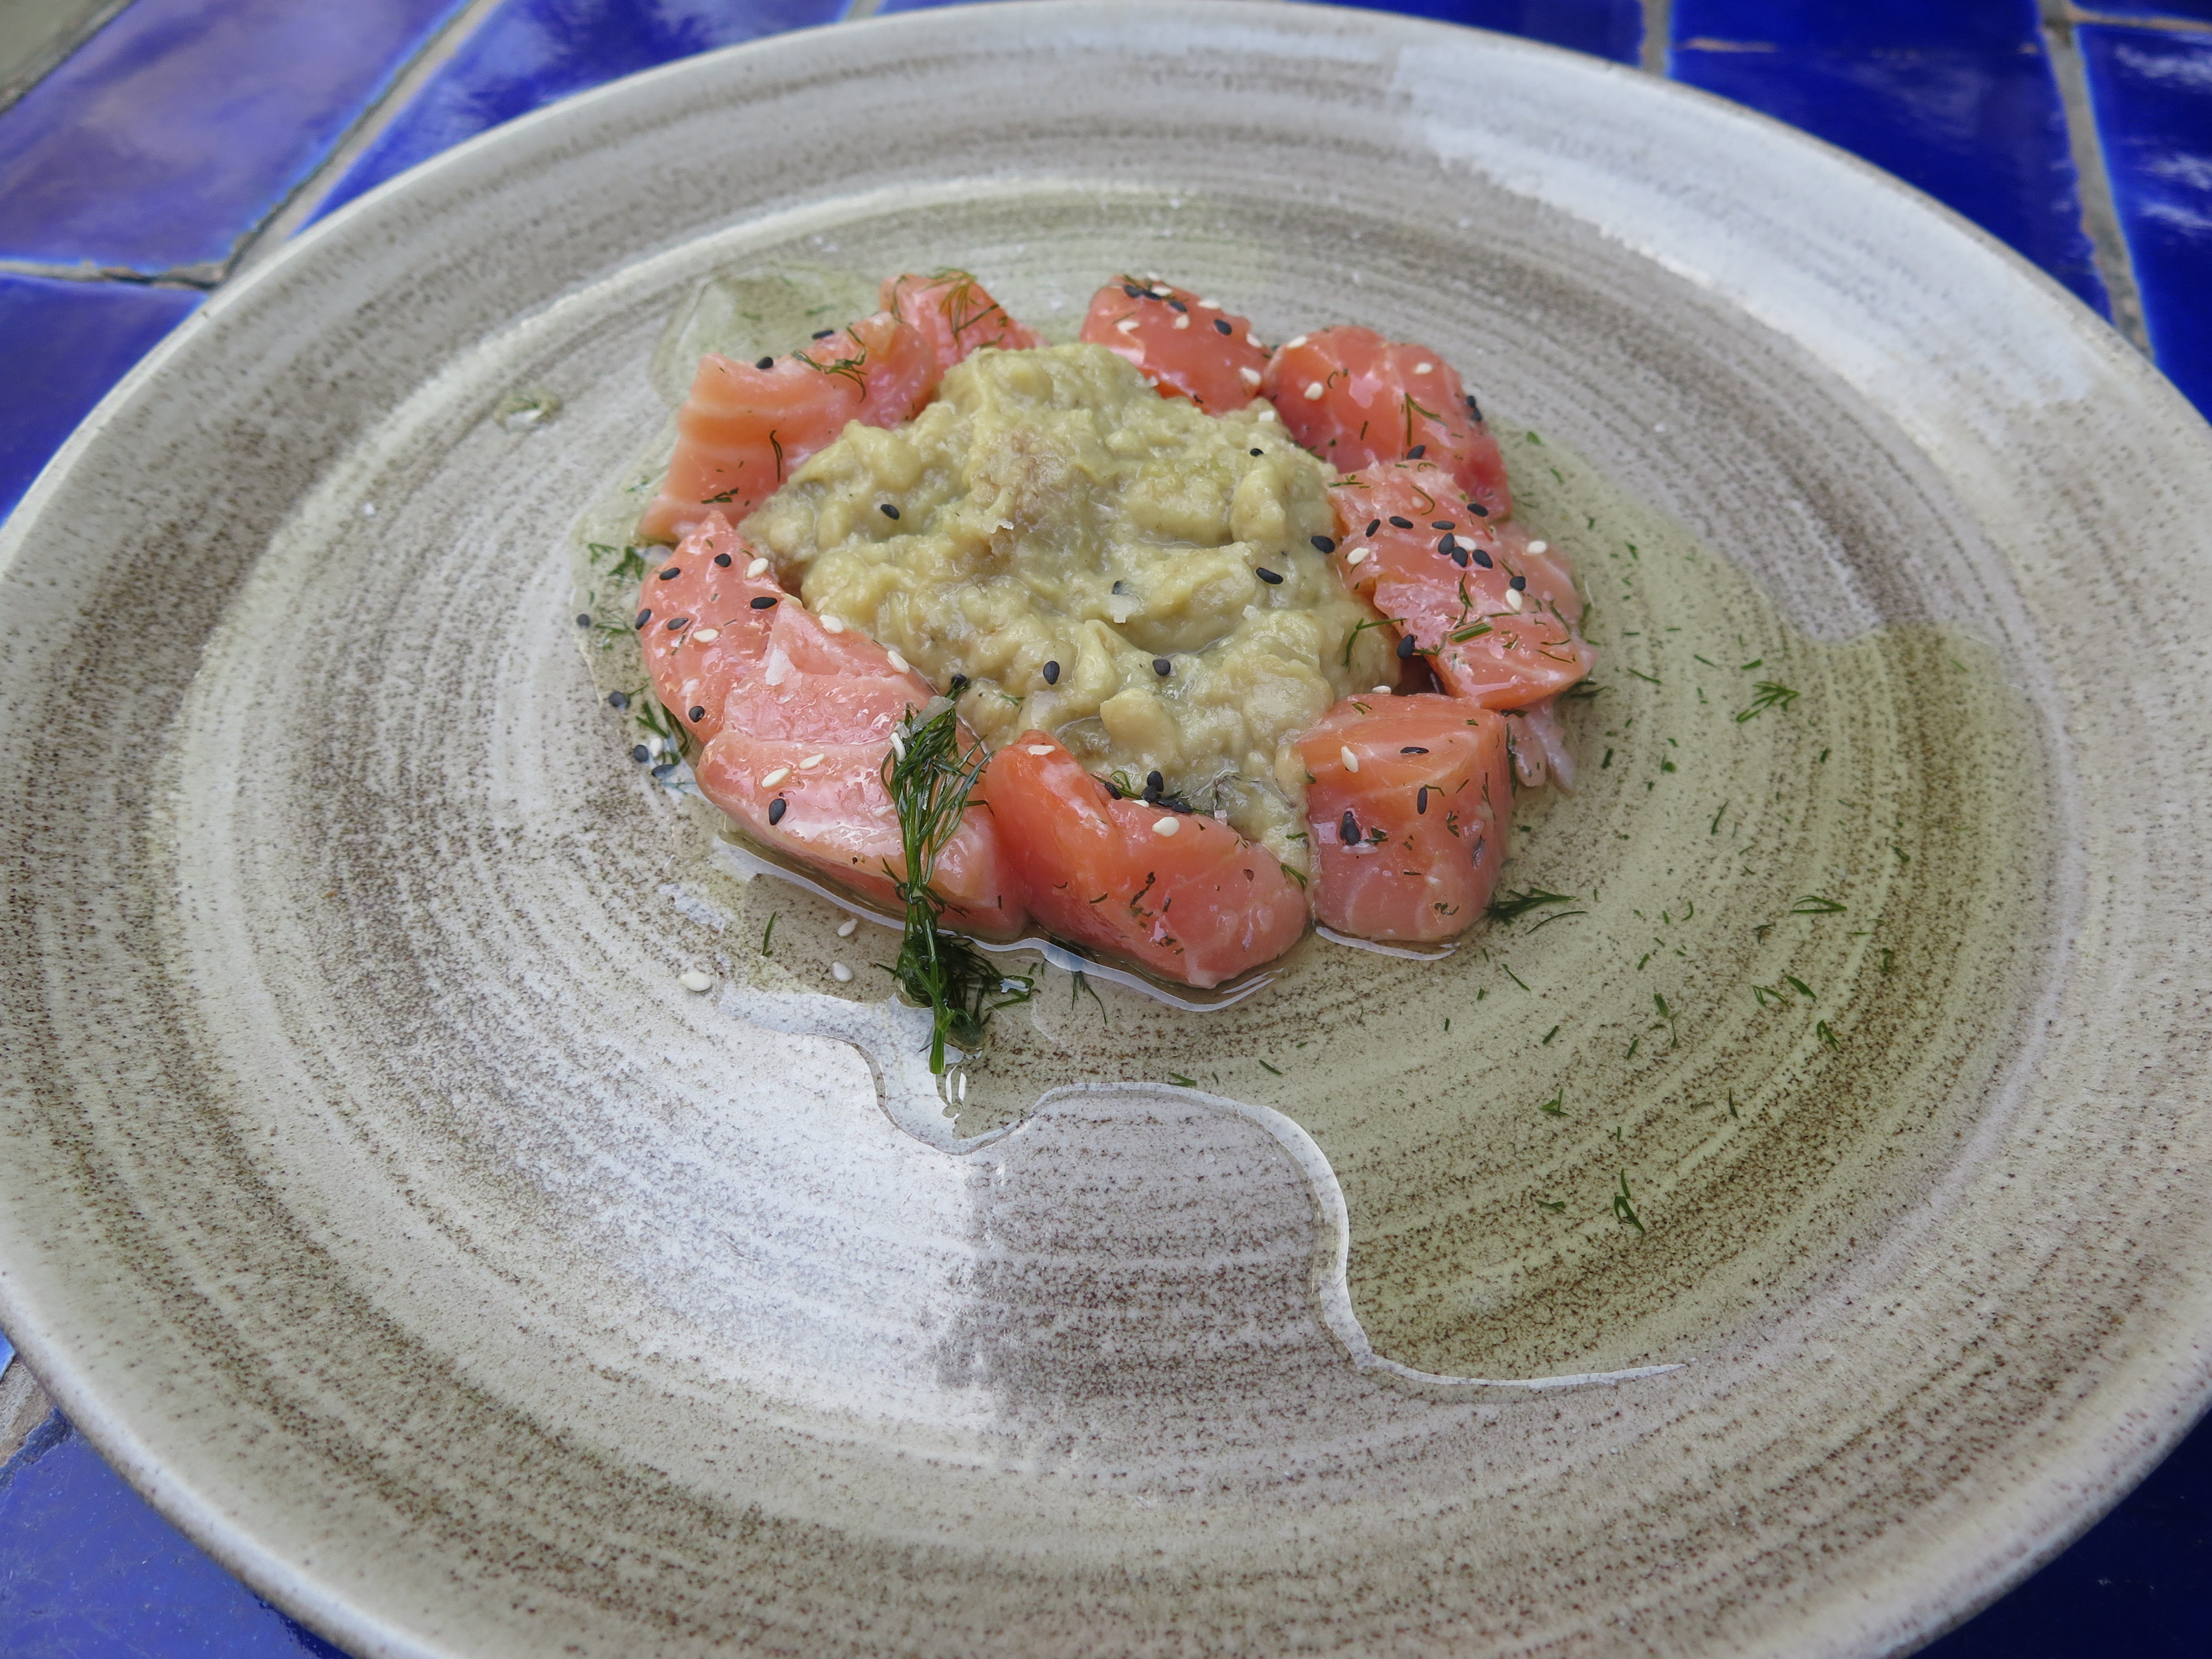 Salmon cubes marinated with dill on mutamal